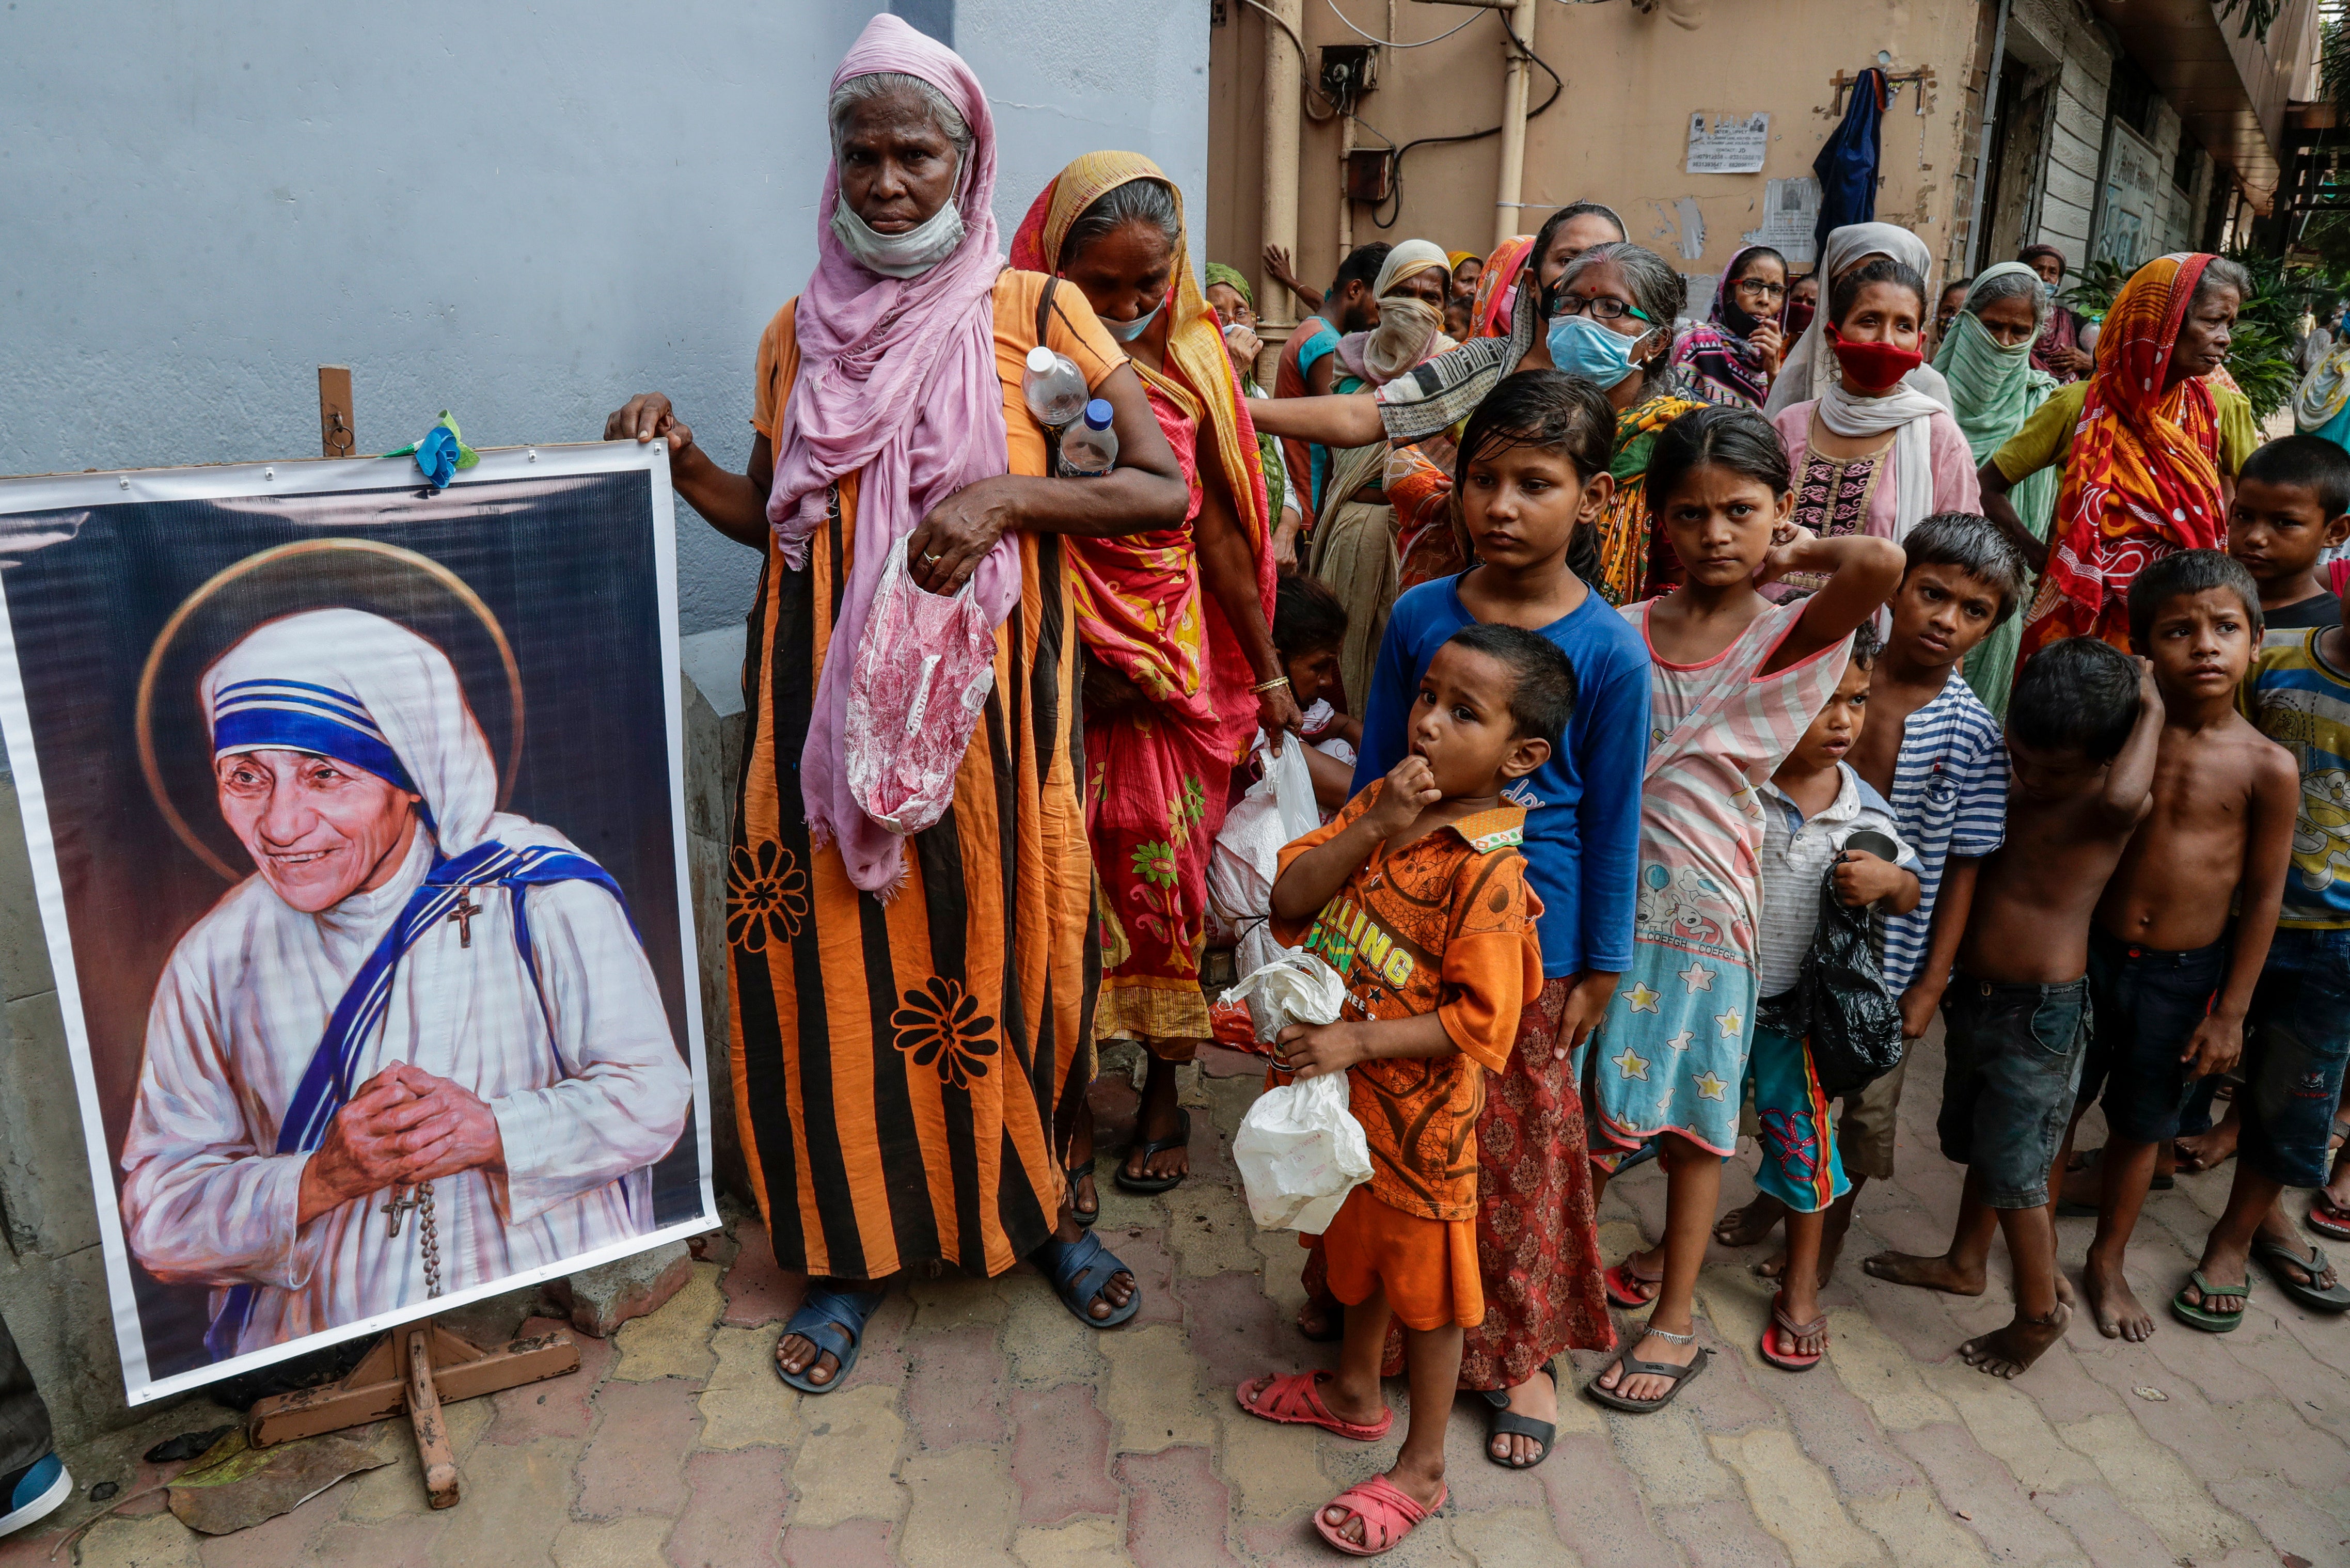 Missionaries of Charity operates nearly 250 homes for orphans, the destitute and AIDS patients in India